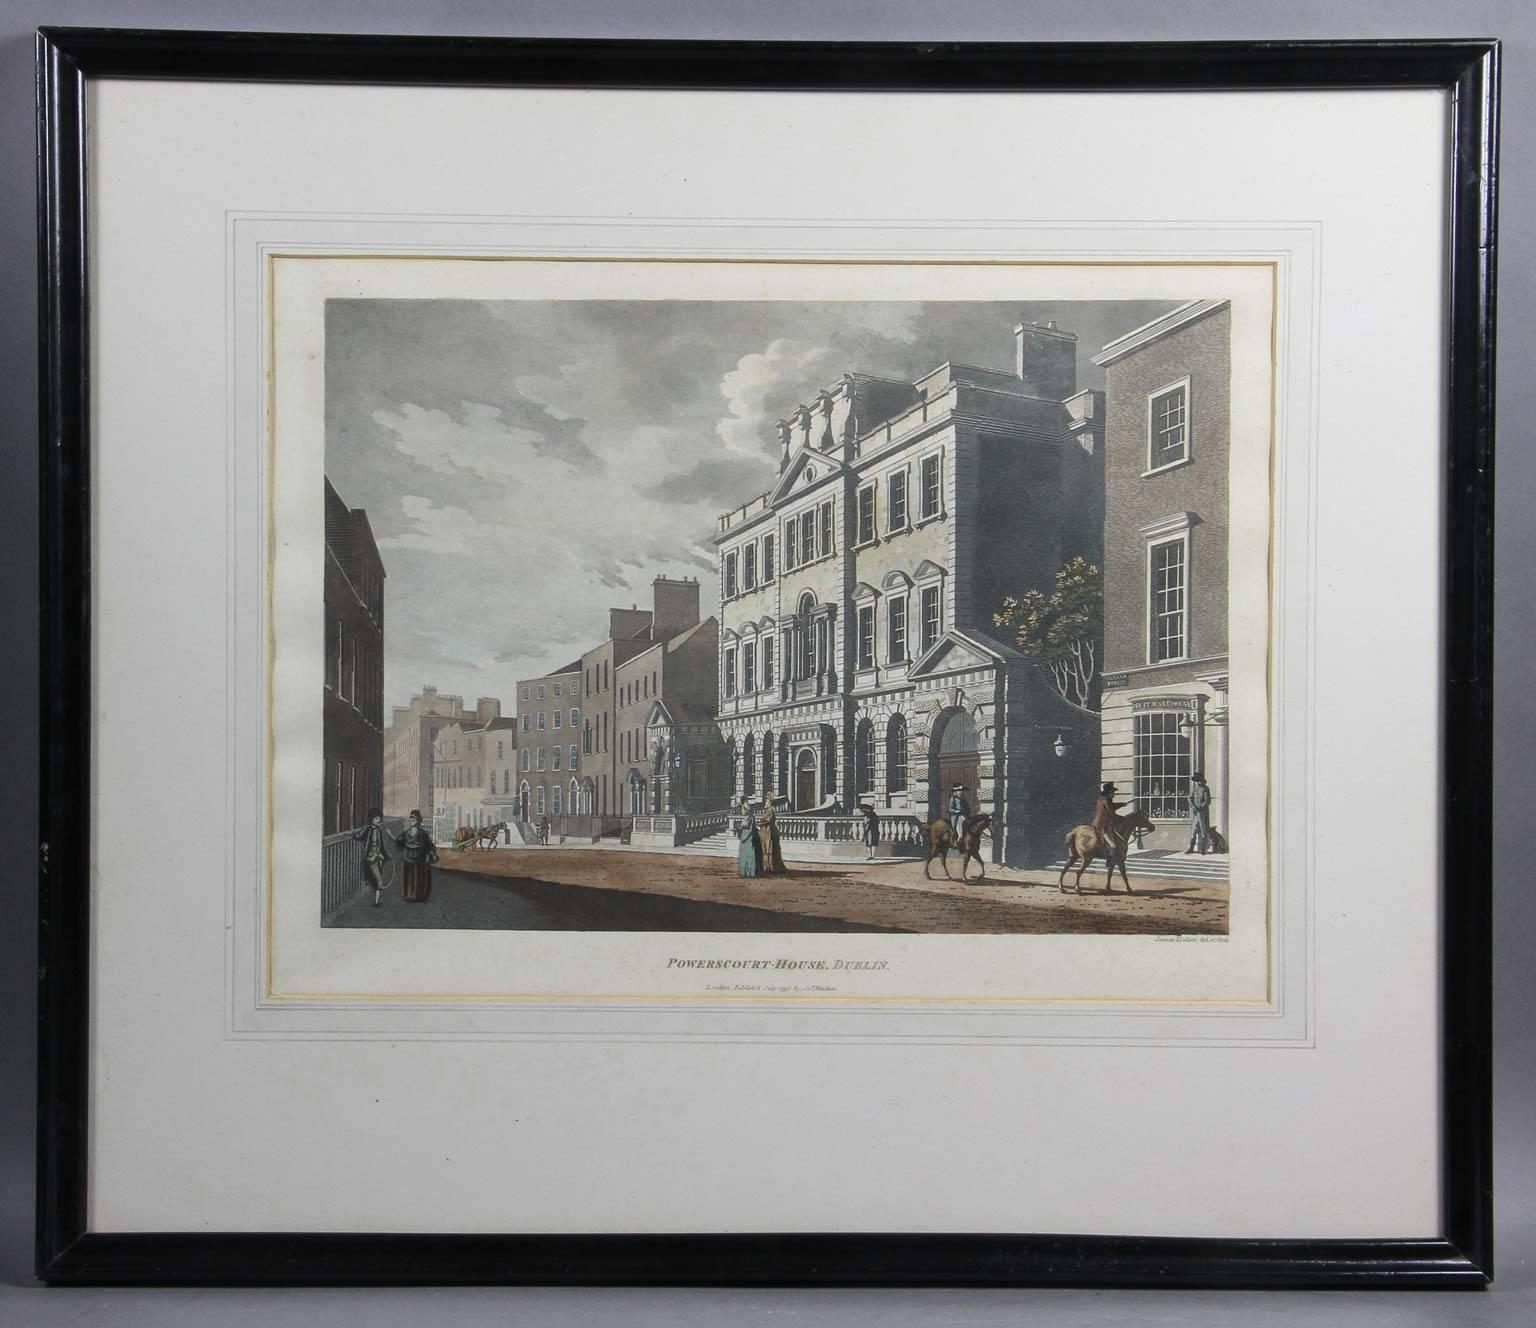 Including; great Courtyard at Dublin Castle, Customs House, West Front of St Patricks, Rotunda and New Rooms. Double matted in ebonized frames. Note: Part of the artists 